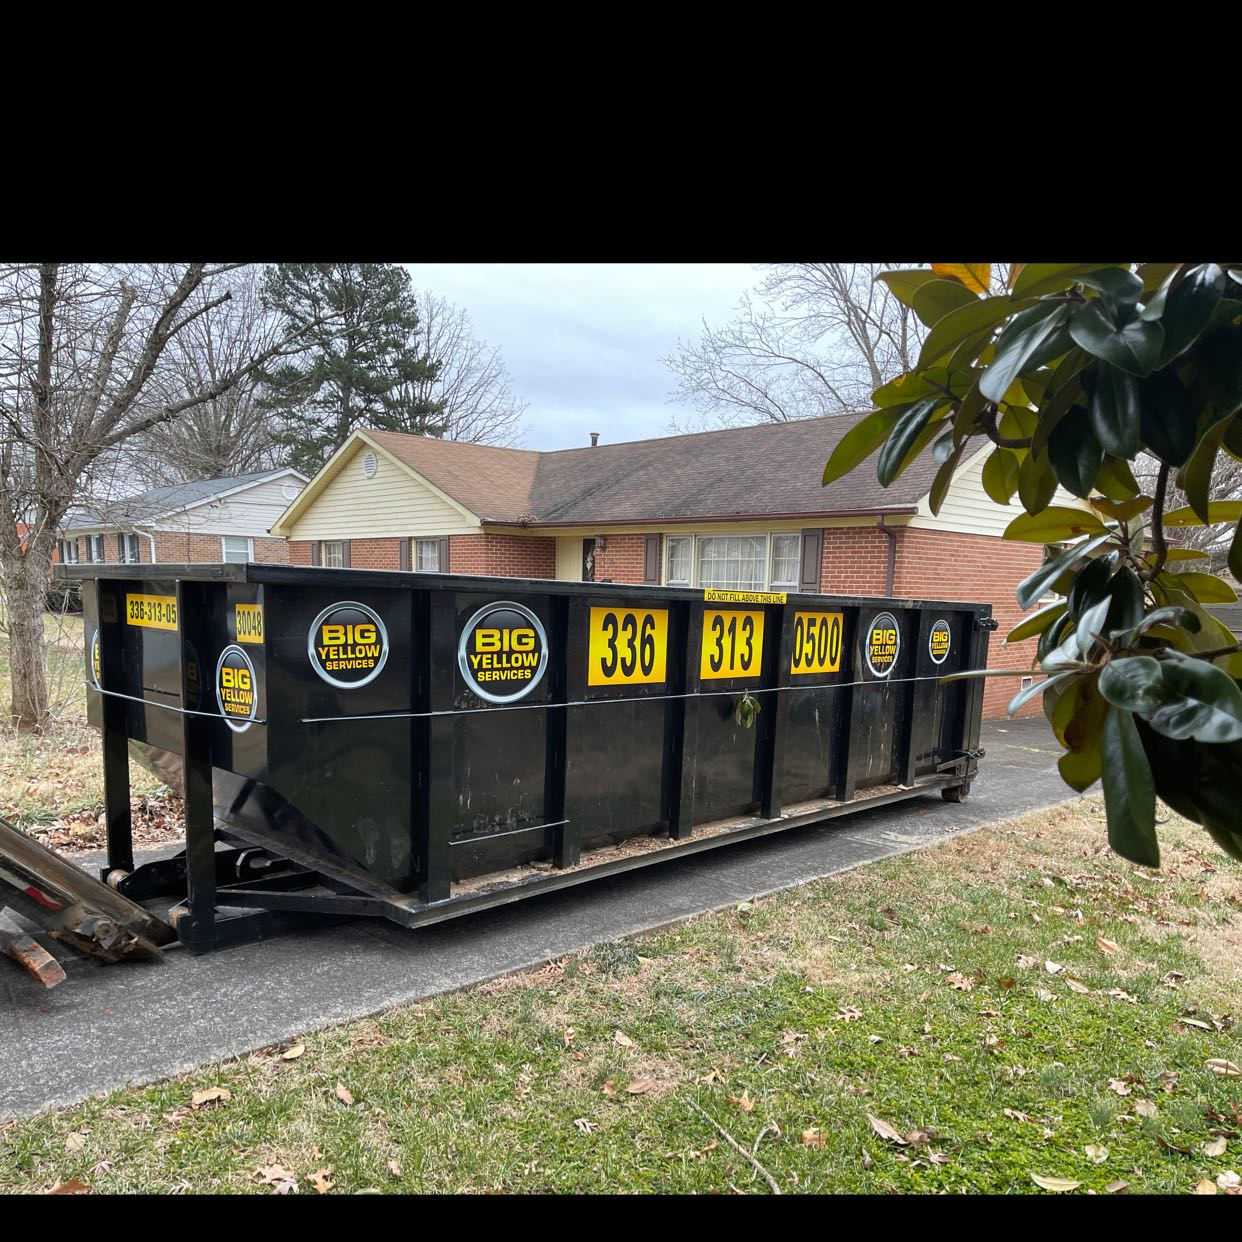 as93vdk13nbsigv7fmob Privacy Policy | Roll-Off Dumpster and Portable Toilet Rentals | Big Yellow Services, LLC